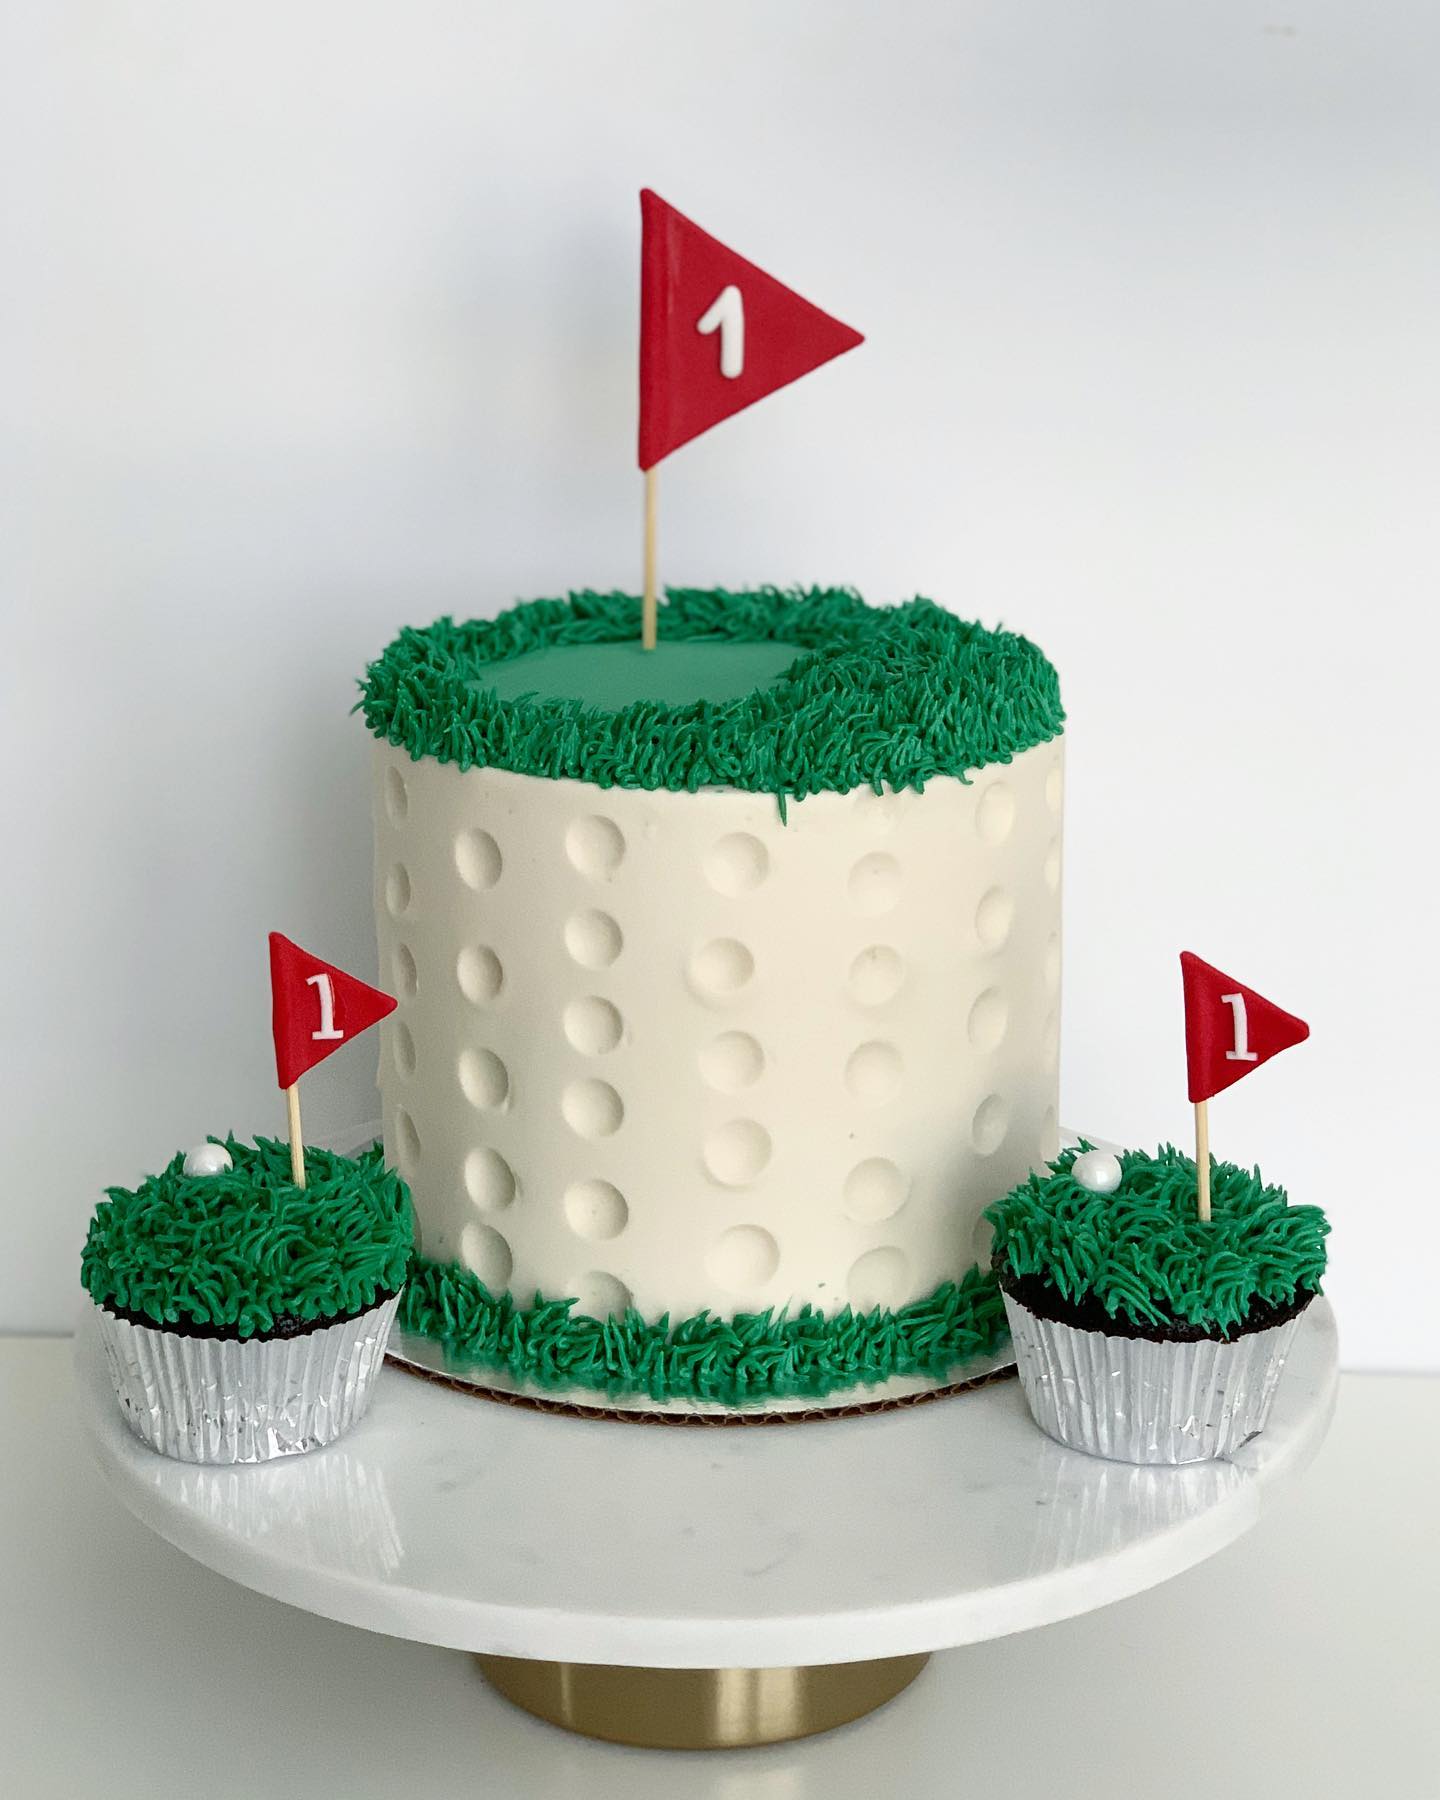 Golf themed cake pops for a... - Maureen's Cake Pop Creations | Facebook